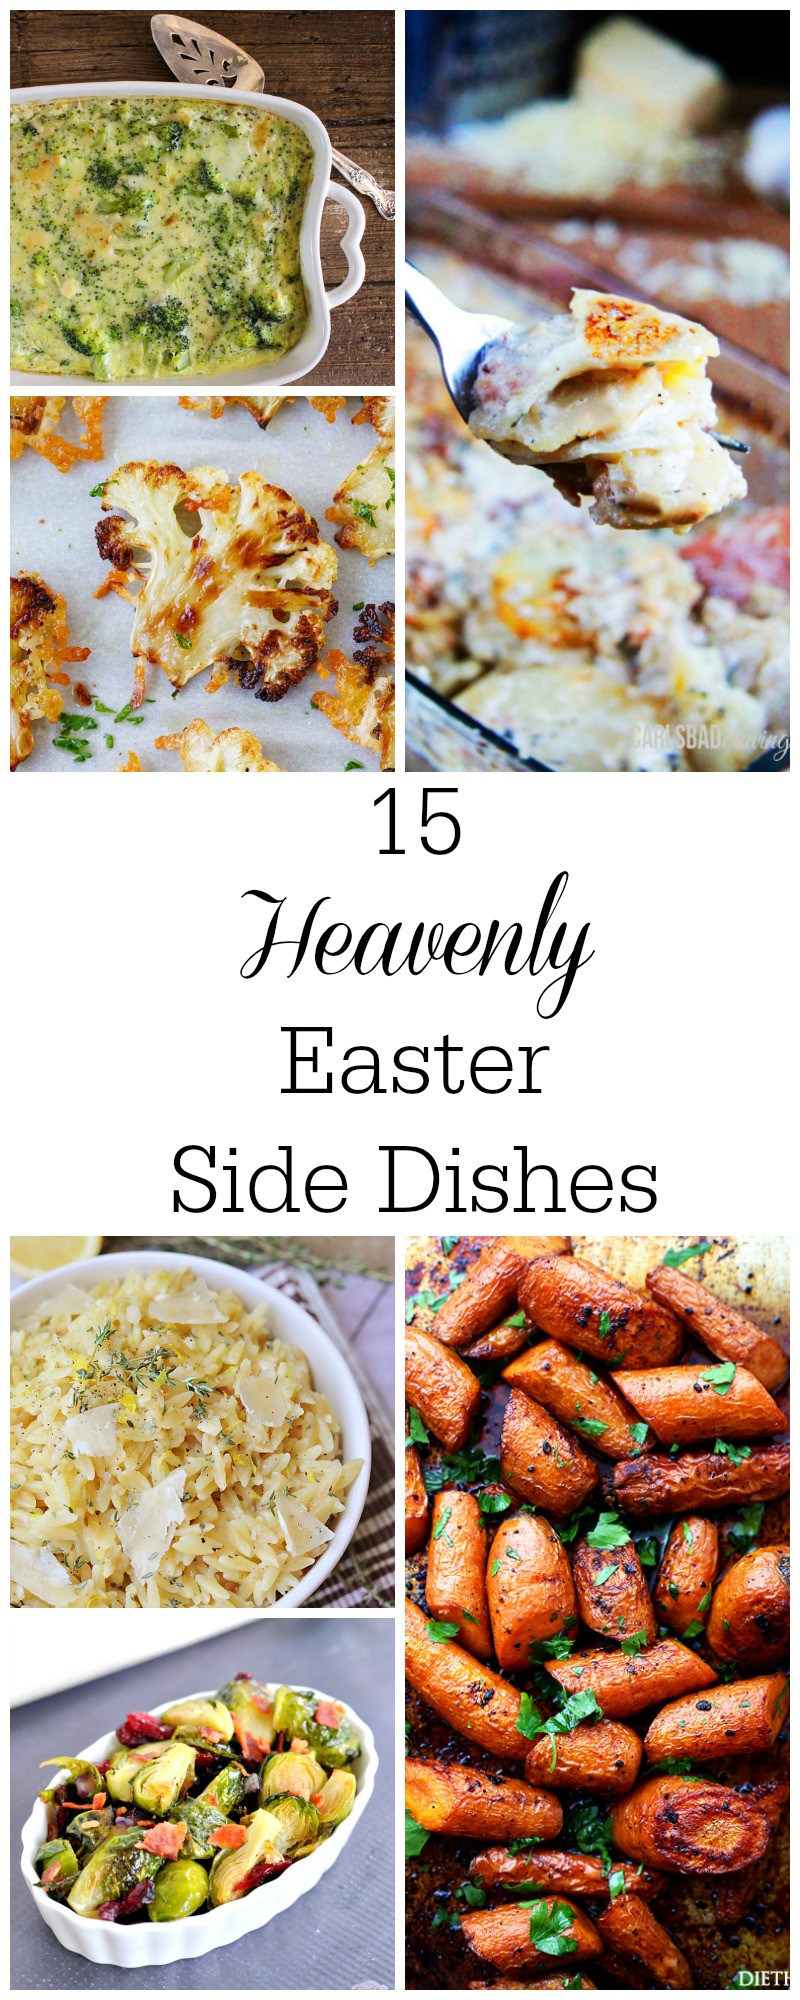 Easter Brunch Side Dishes
 Our Very Favorite Easter Recipes My Suburban Kitchen